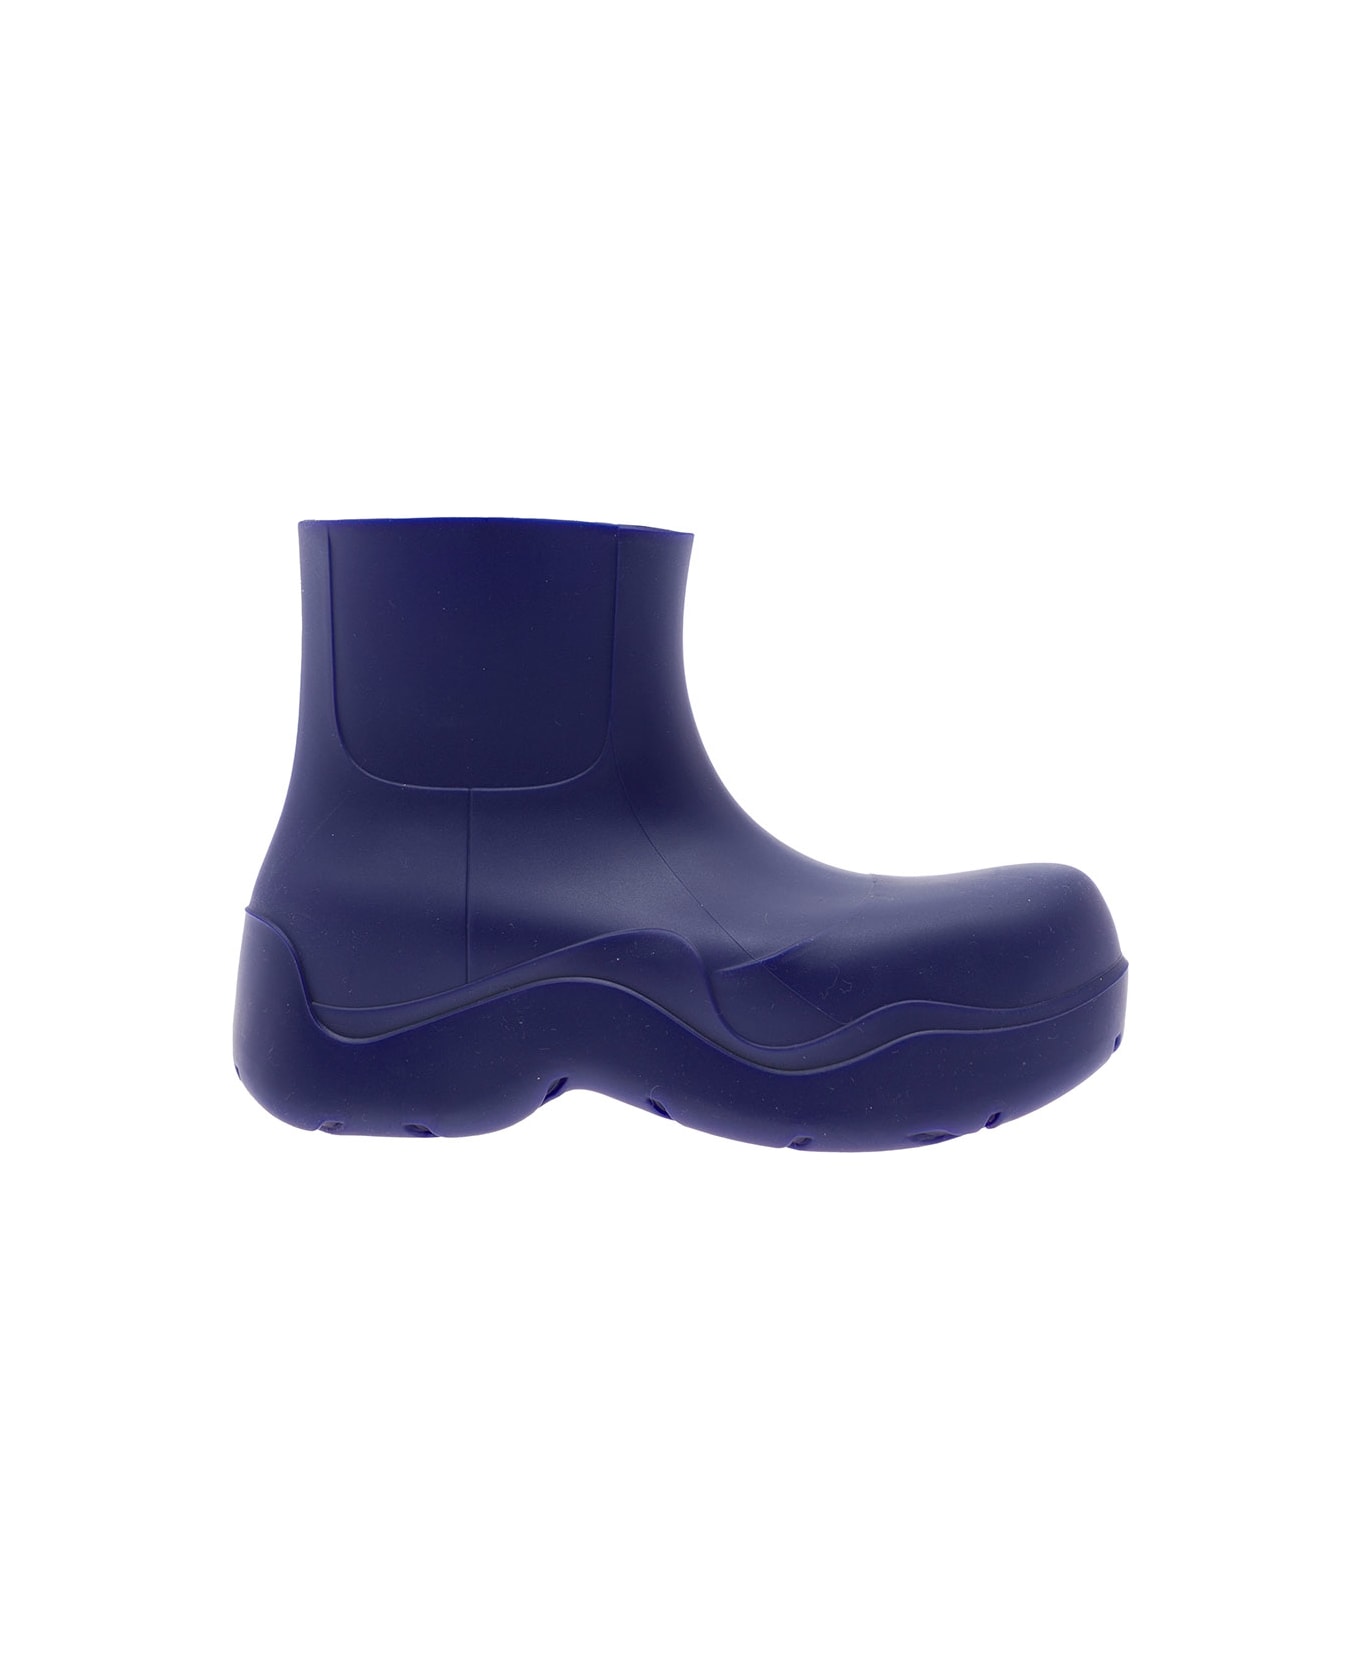 Bottega Veneta 'puddle' Blue Boots With Chunky Platform And Matte Finish In Rubber Woman - Violet